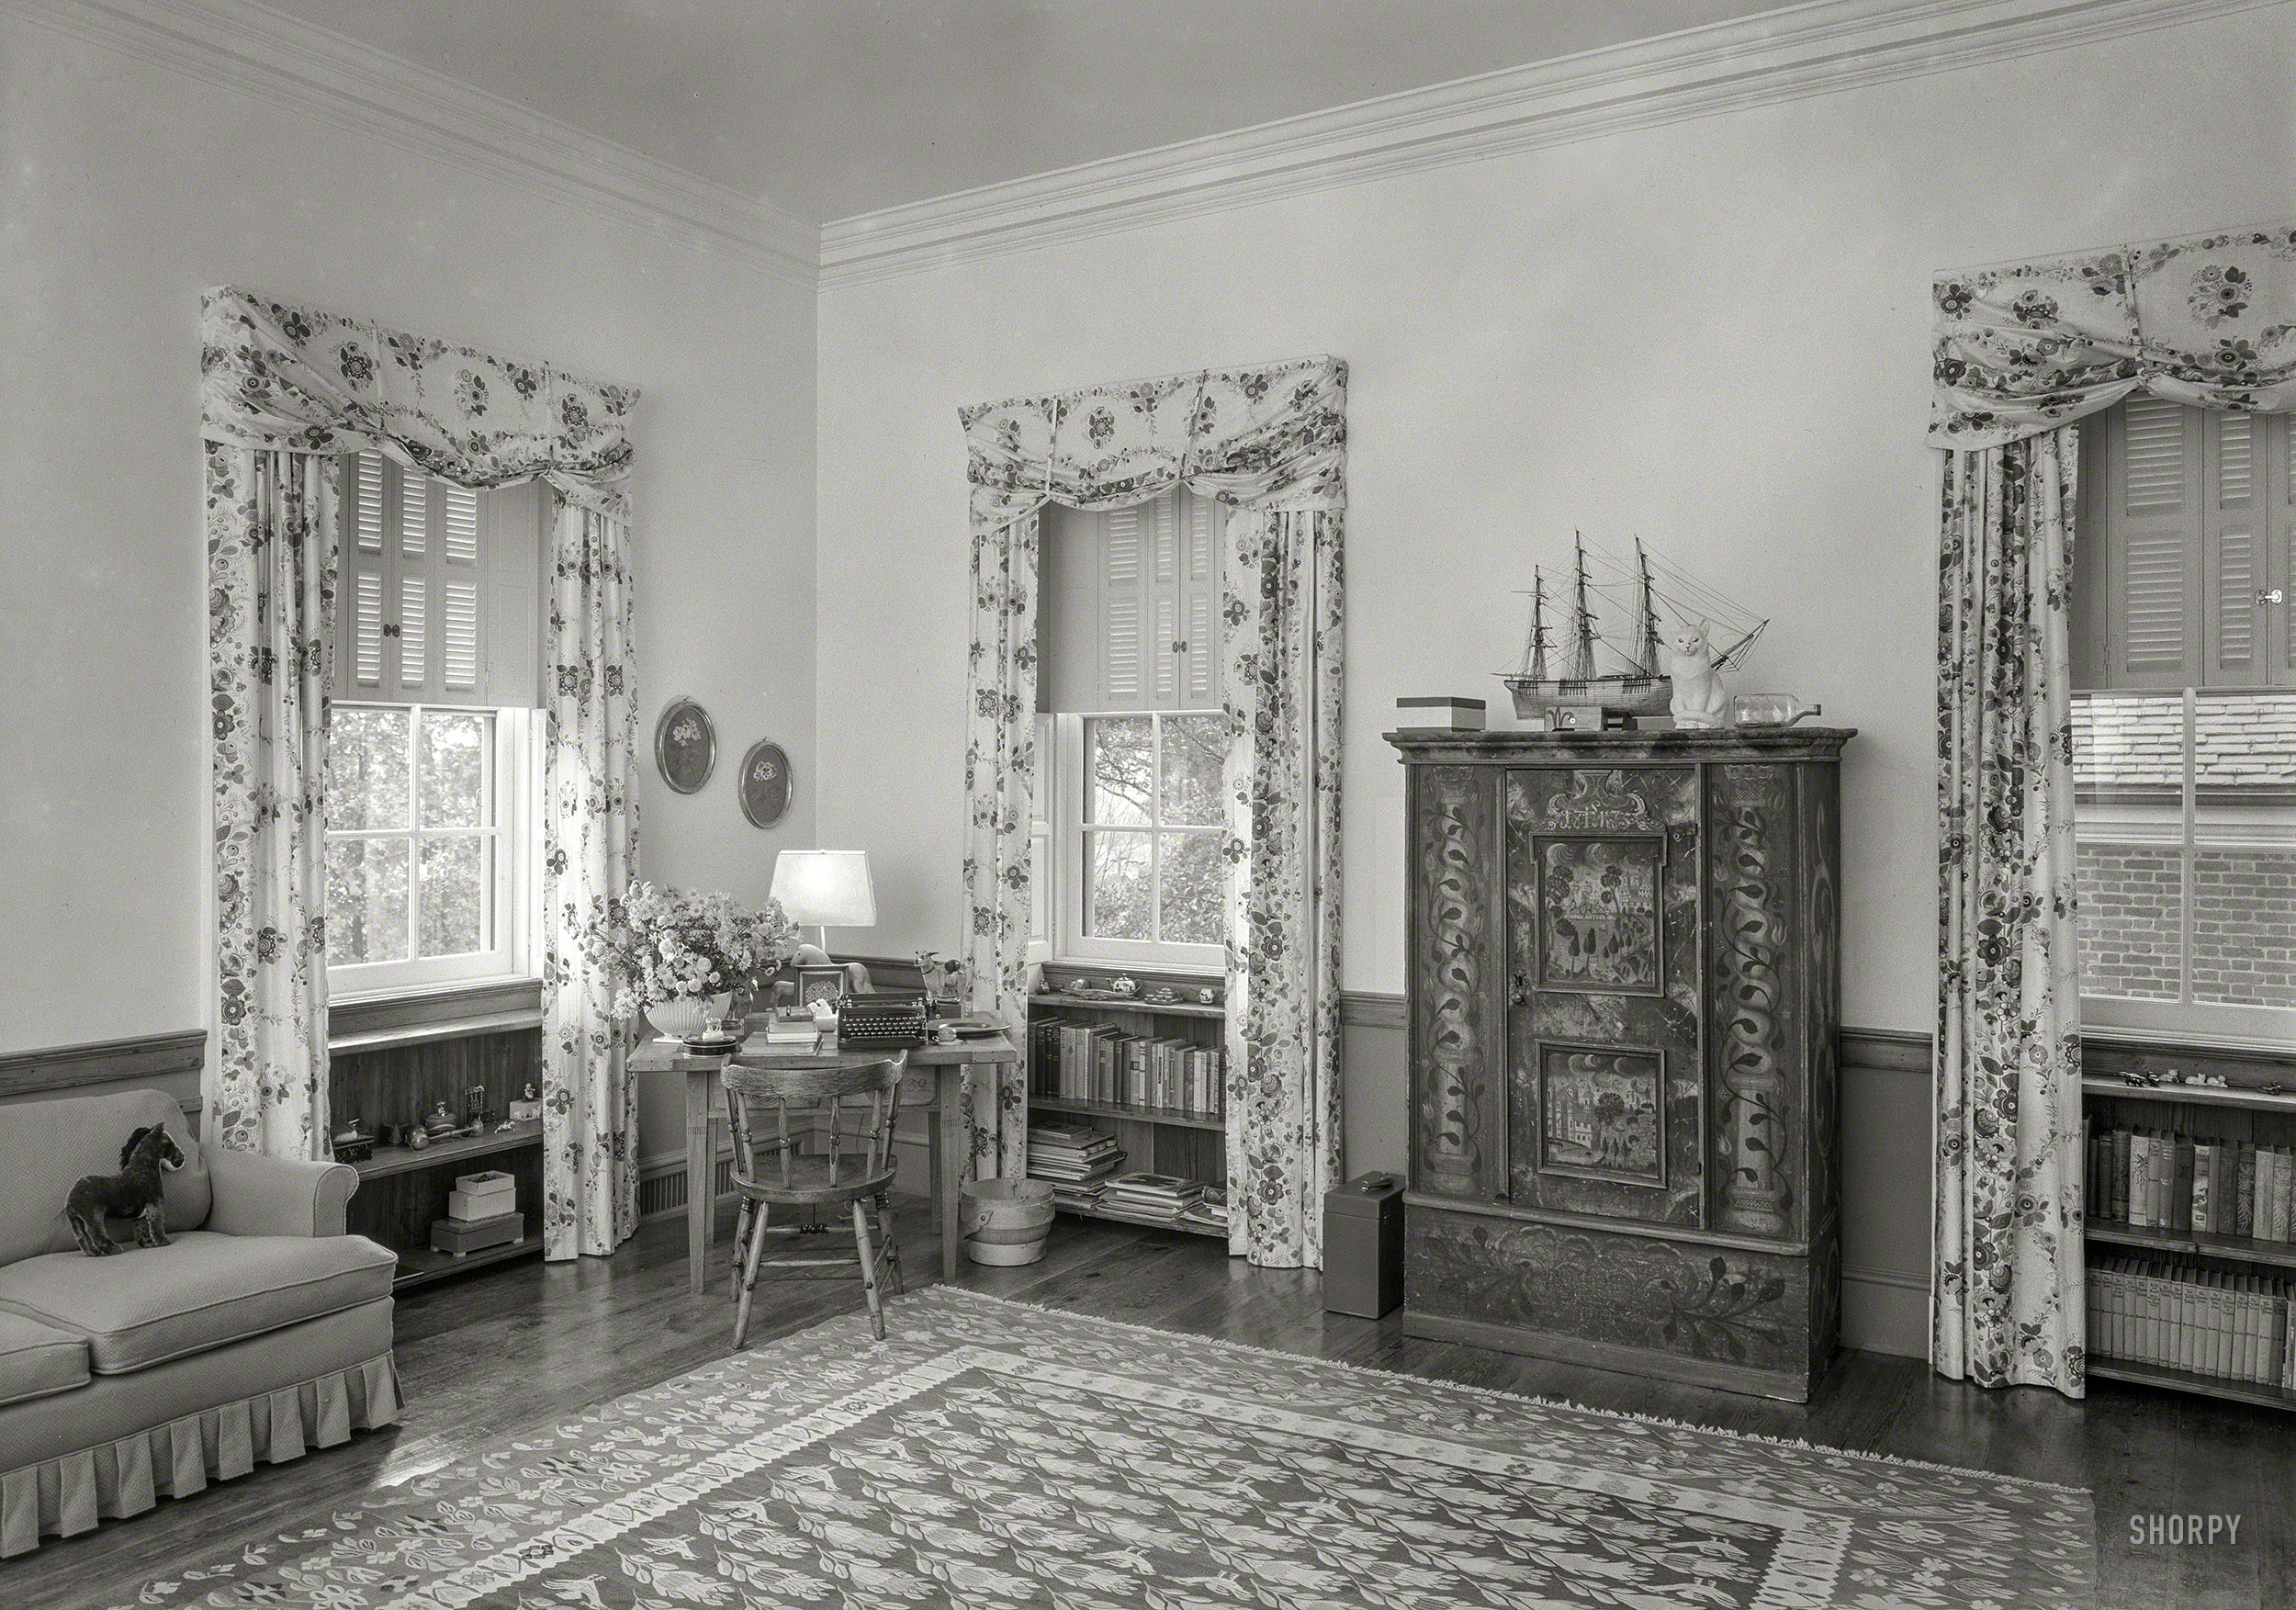 Oct. 29, 1946. "Paul Mellon, residence in Upperville, Virginia. Daughter's room, to chest." The daughter would be Catherine Mellon, whose brother Timothy's room we saw here. Large-format negative by Gottscho-Schleisner. View full size.